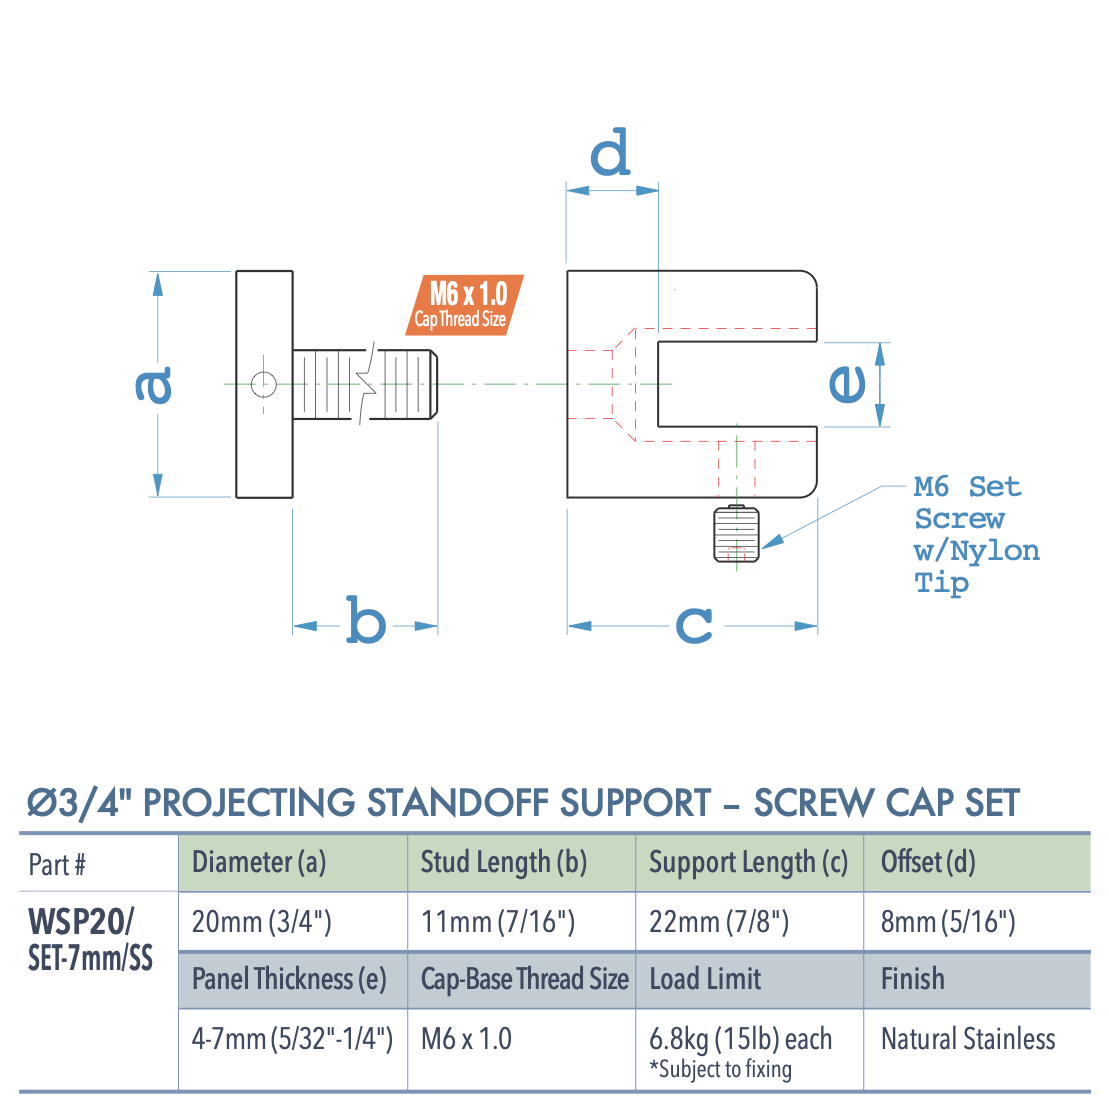 Specifications for WSP20/SET-7mm/SS